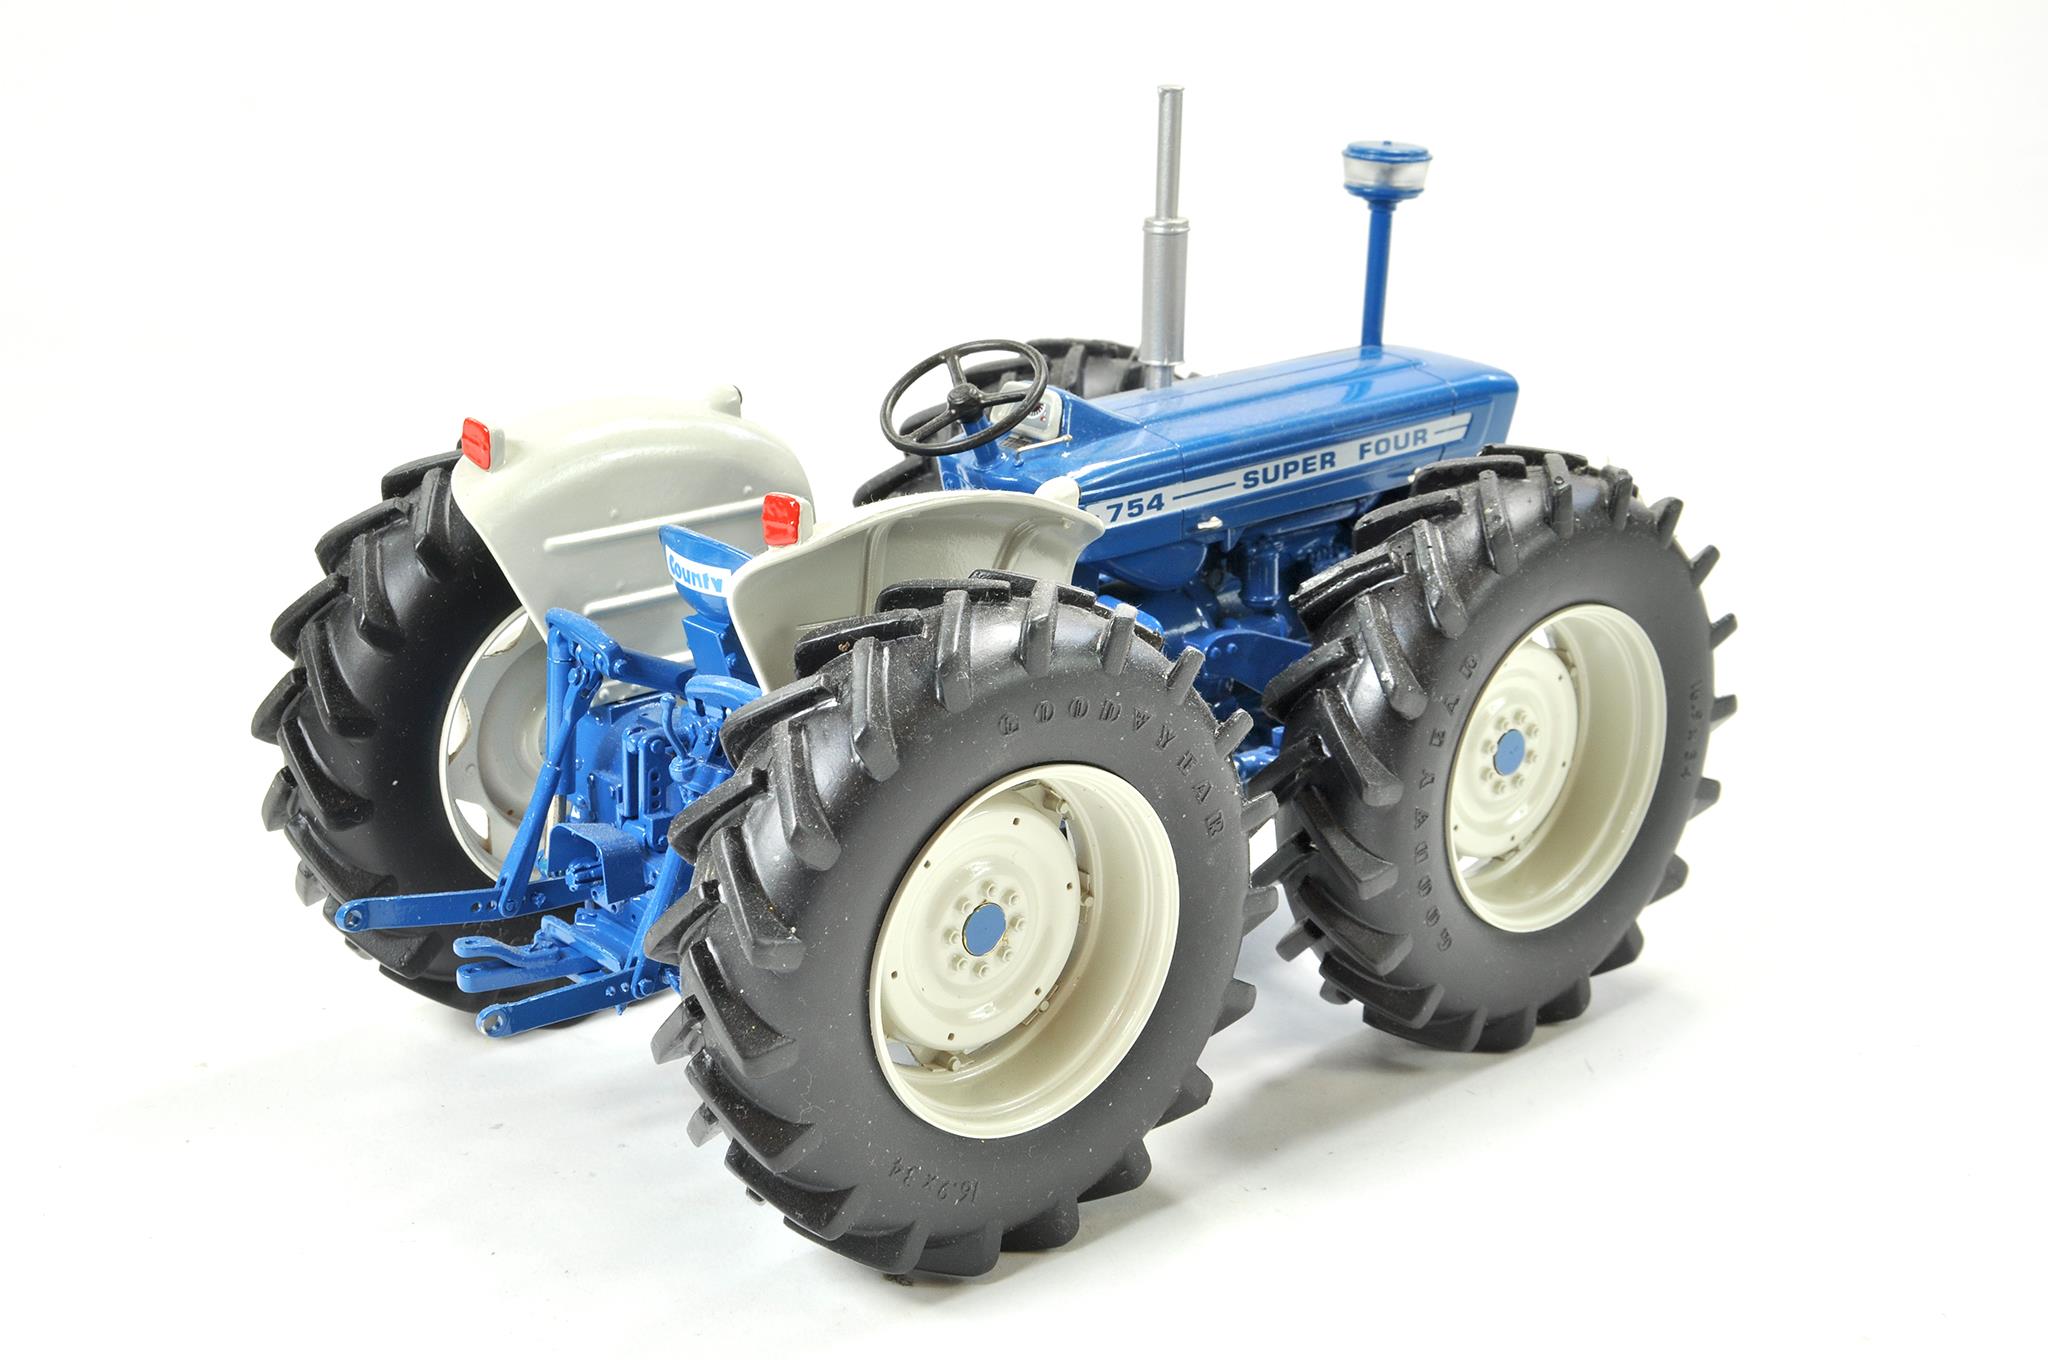 DBP Model Tractors 1/16 Farm Issue comprising County 754 Super Four Tractor. Appears excellent, - Image 3 of 4